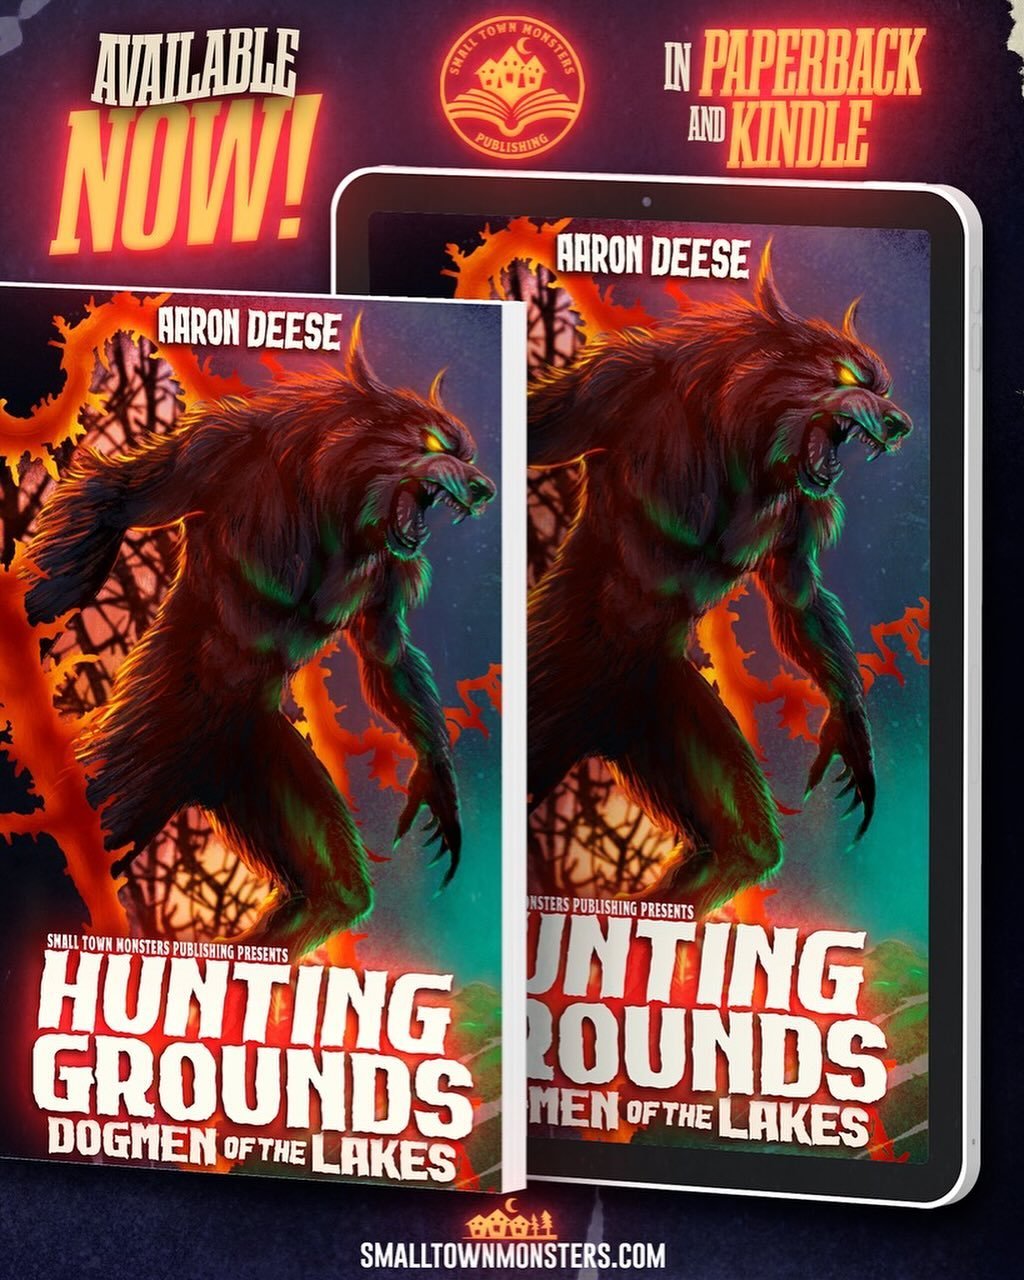 Hunting Grounds: Dogmen of The Lakes is now available! Head to smalltownmonsters.com/shop or Amazon to grab your copy. Find out what many say lurks in the shadowed forests of the Land Between the Lakes in Aaron Deese&rsquo;s follow-up to the Texas Do